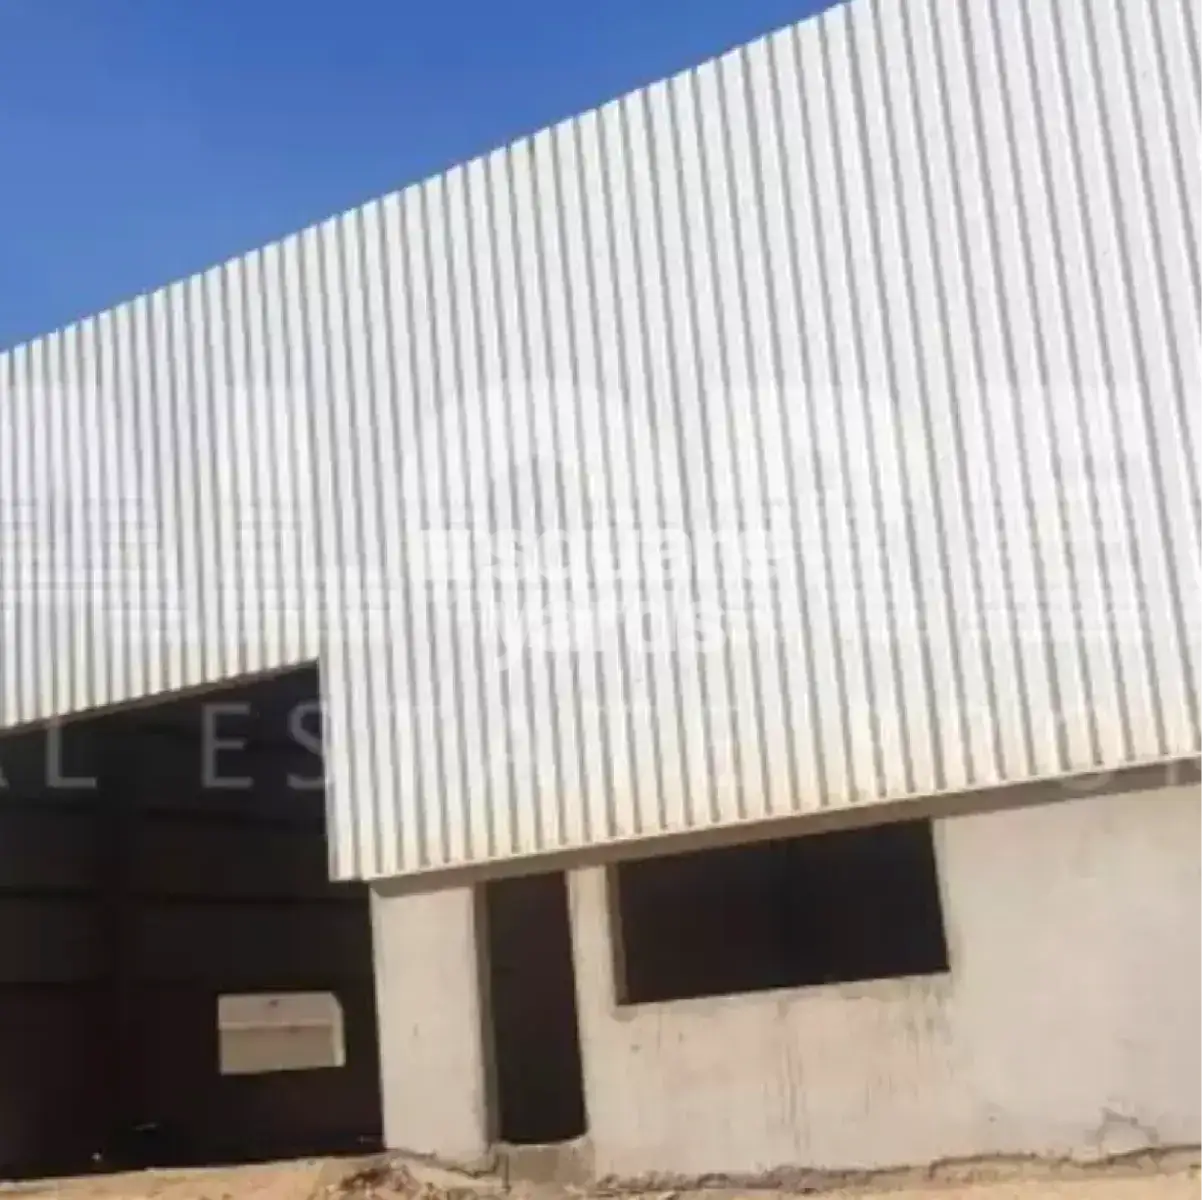 43000 Sq.Ft. Warehouse in Industrial Zone